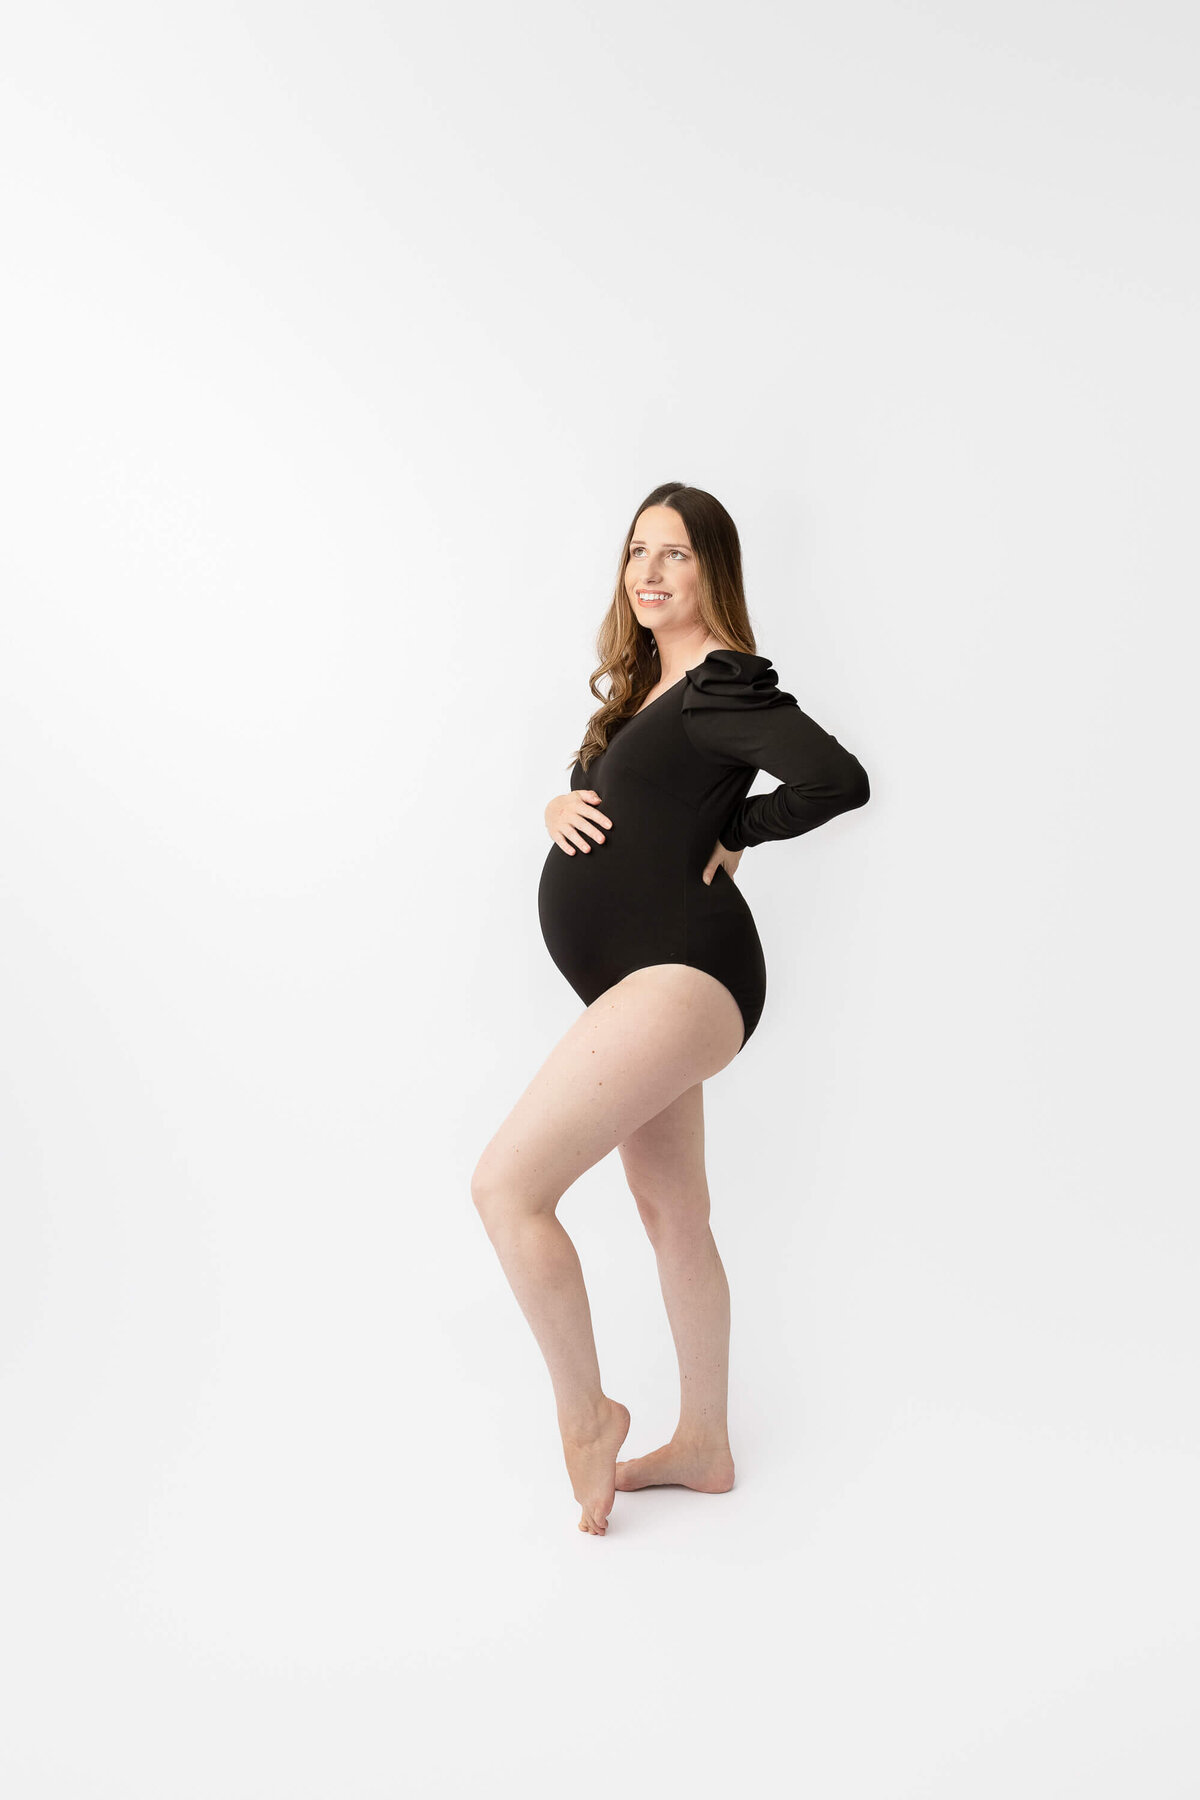 Maternity Studio Session with hair and make upWeb Res 7